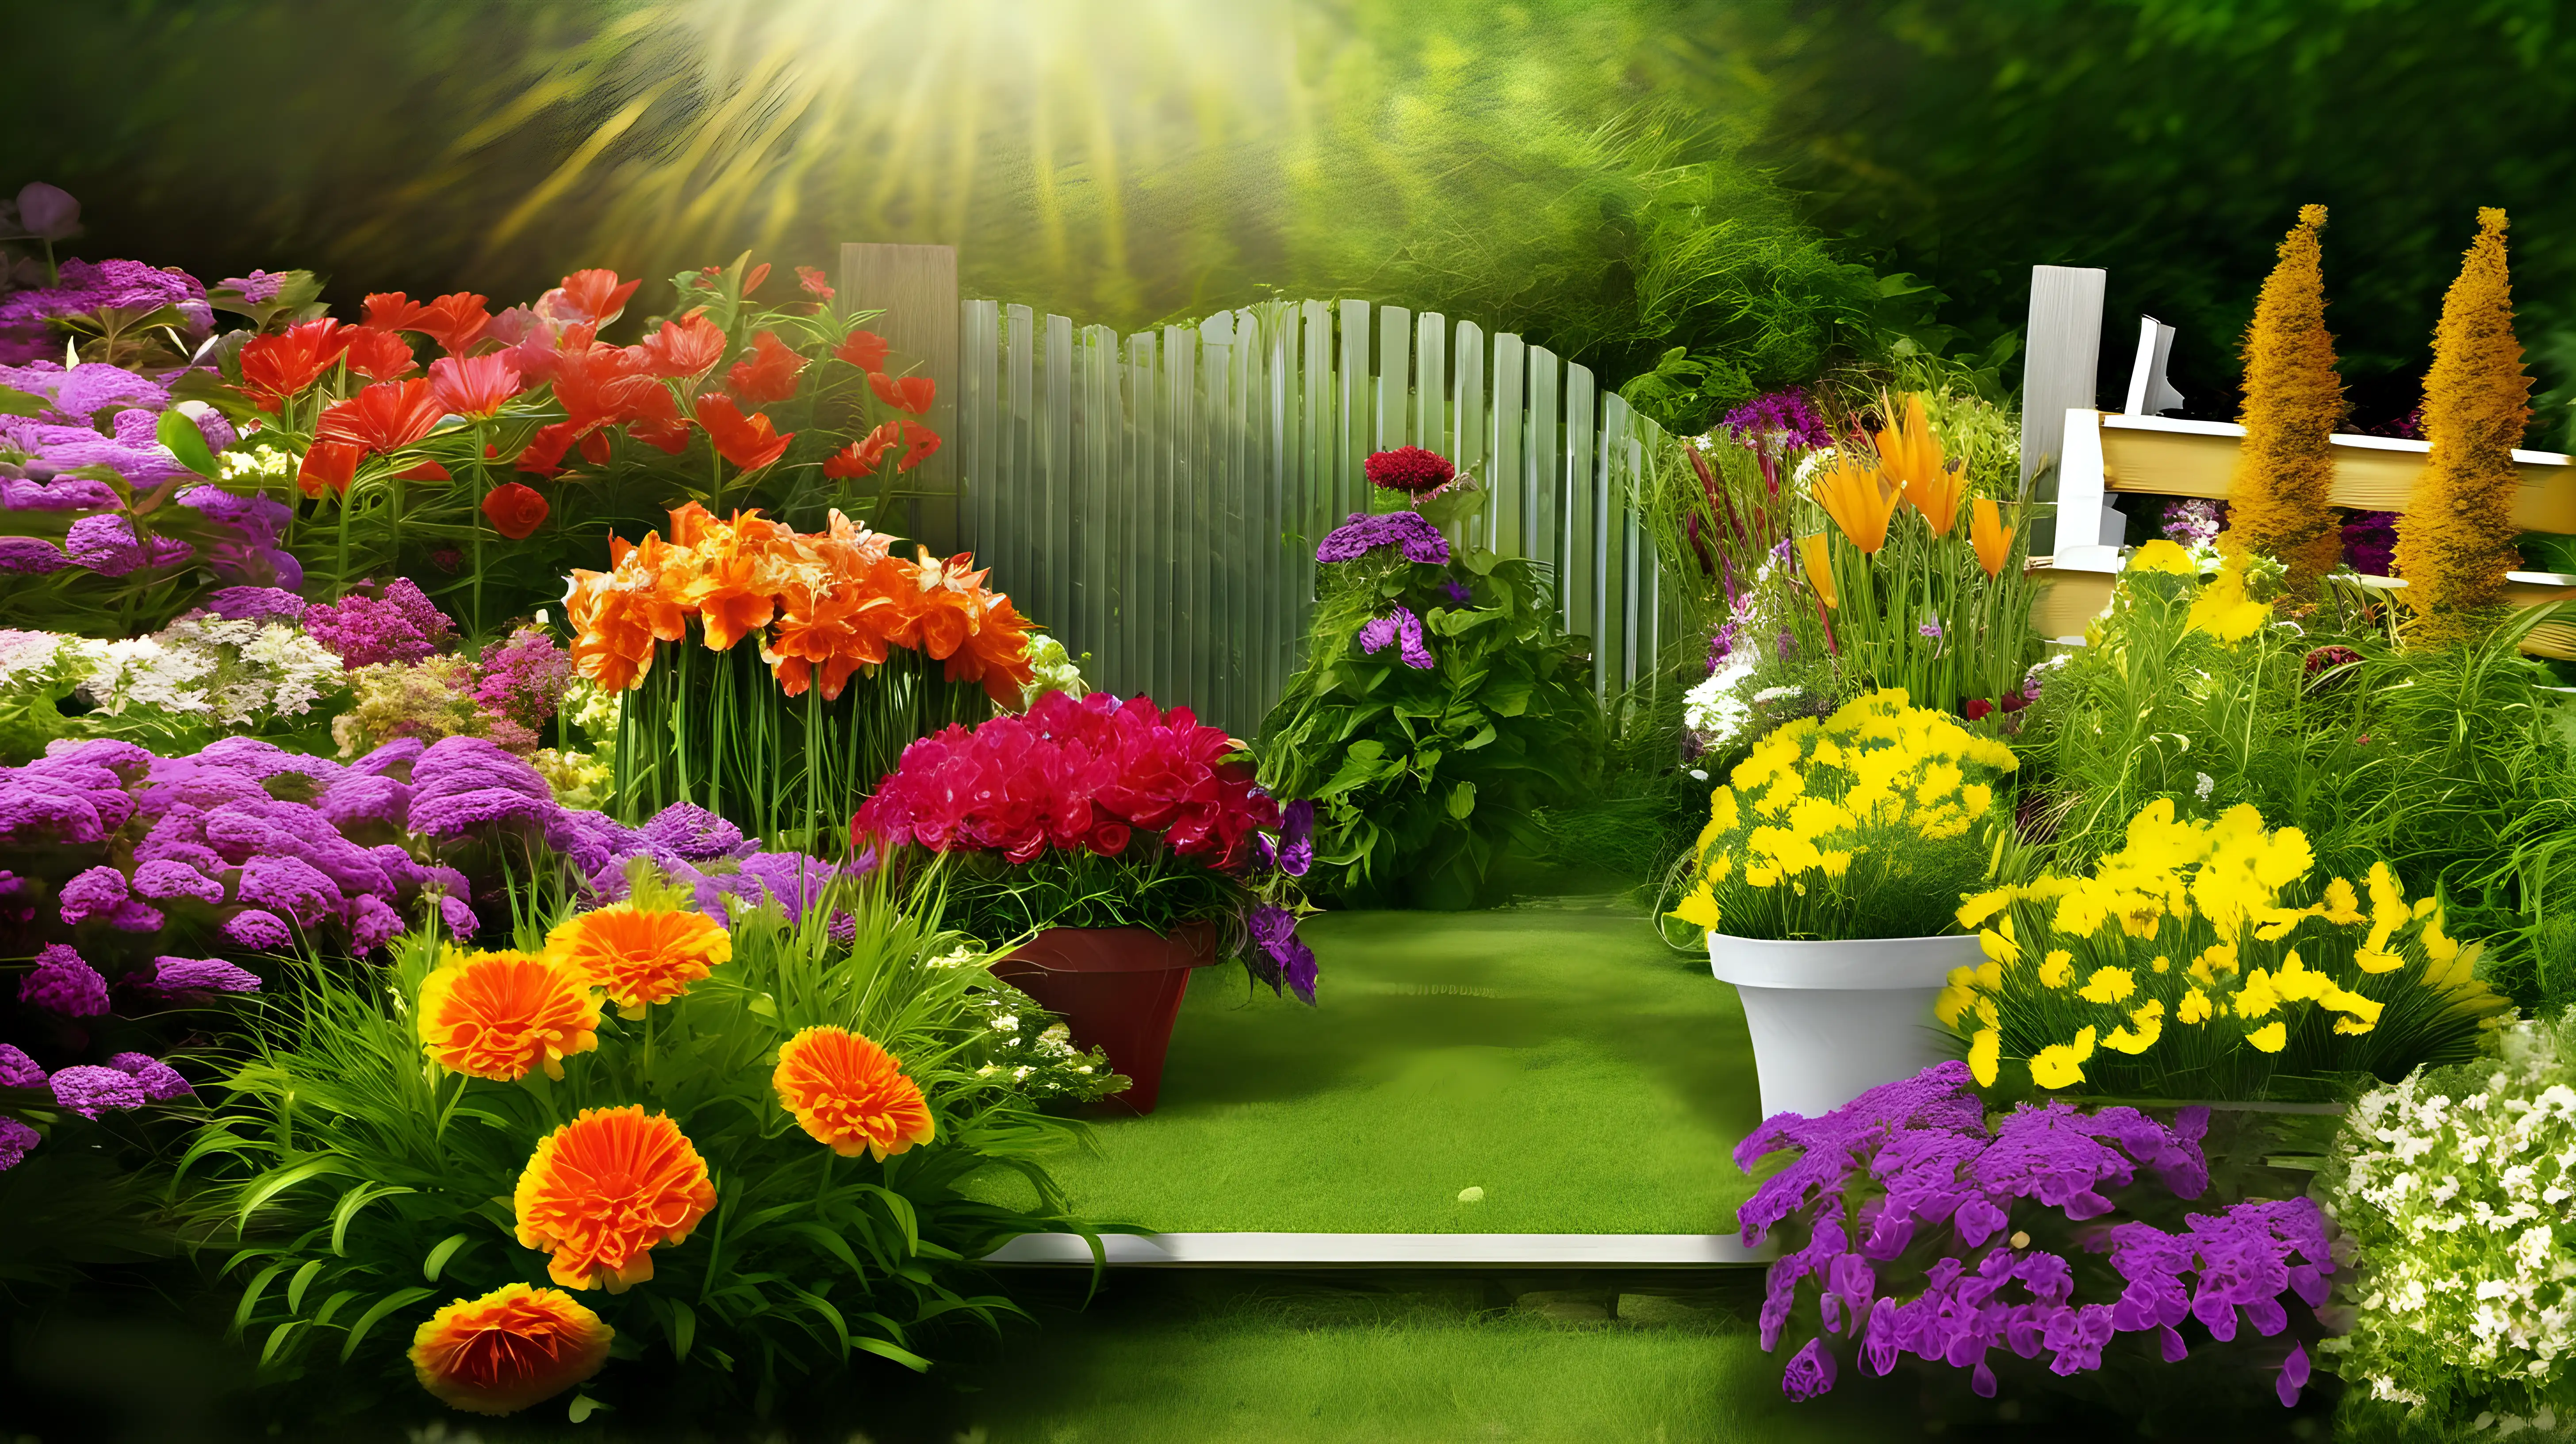 Artistic Gardening with Beautiful Flowers